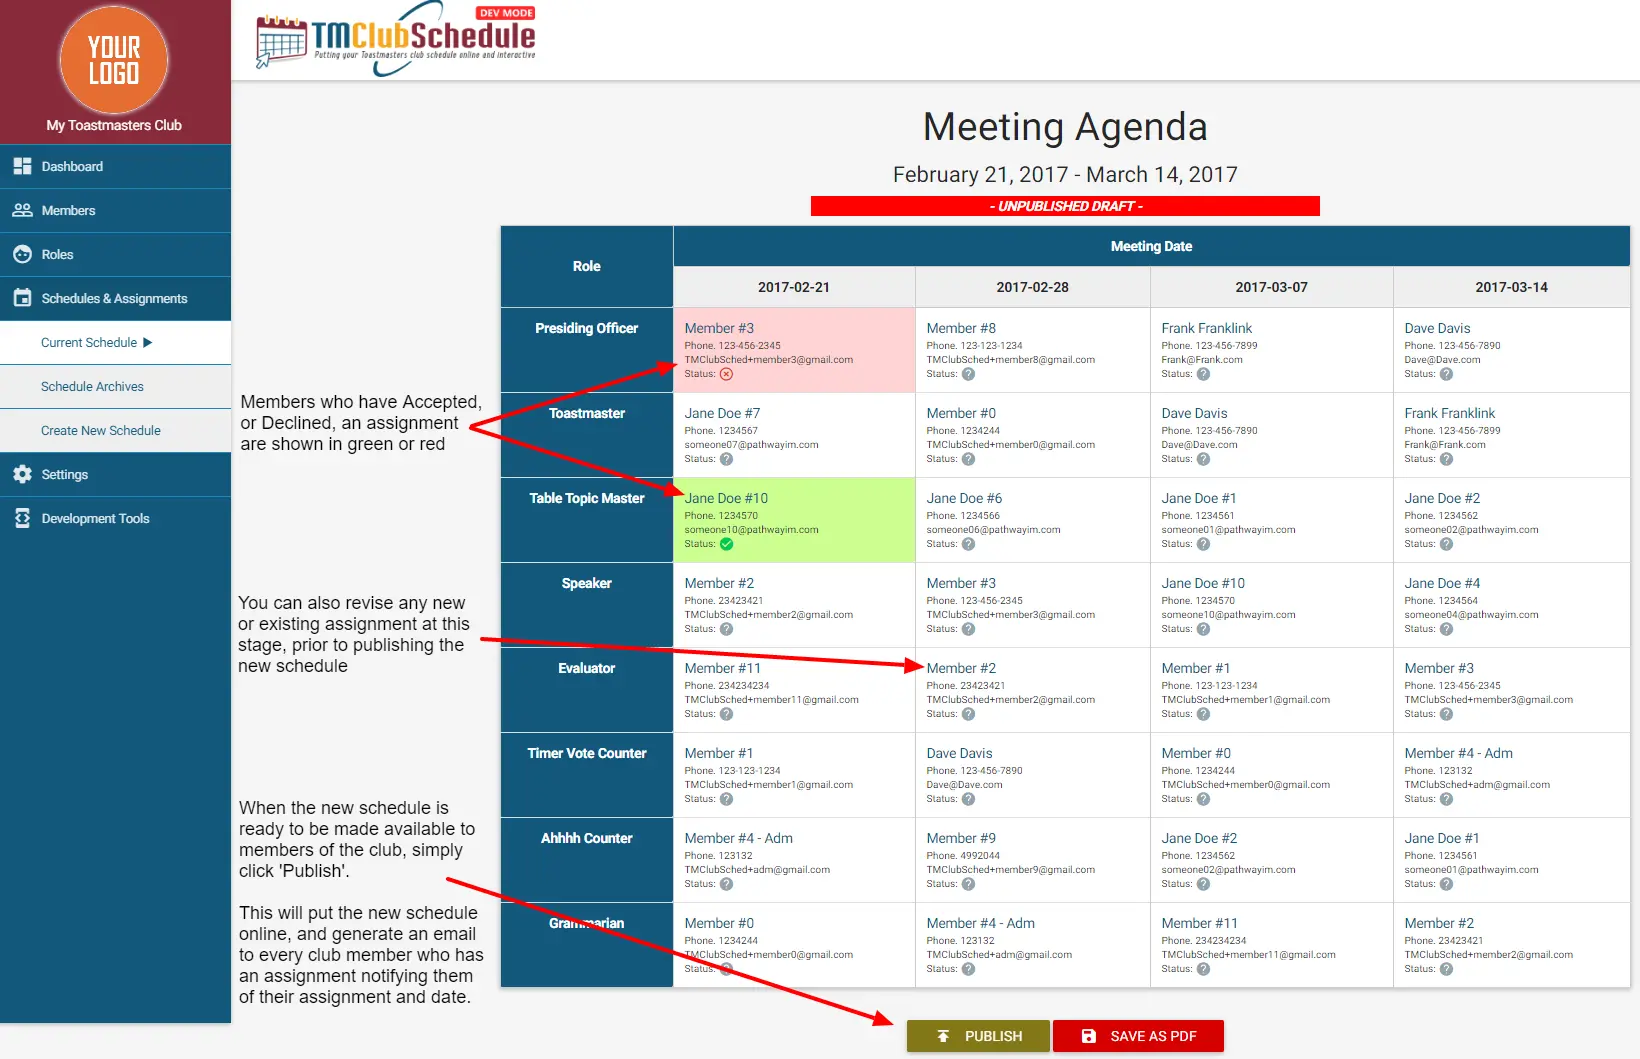 TMClubSchedule: Reviewing, Editing and Publishing Schedule